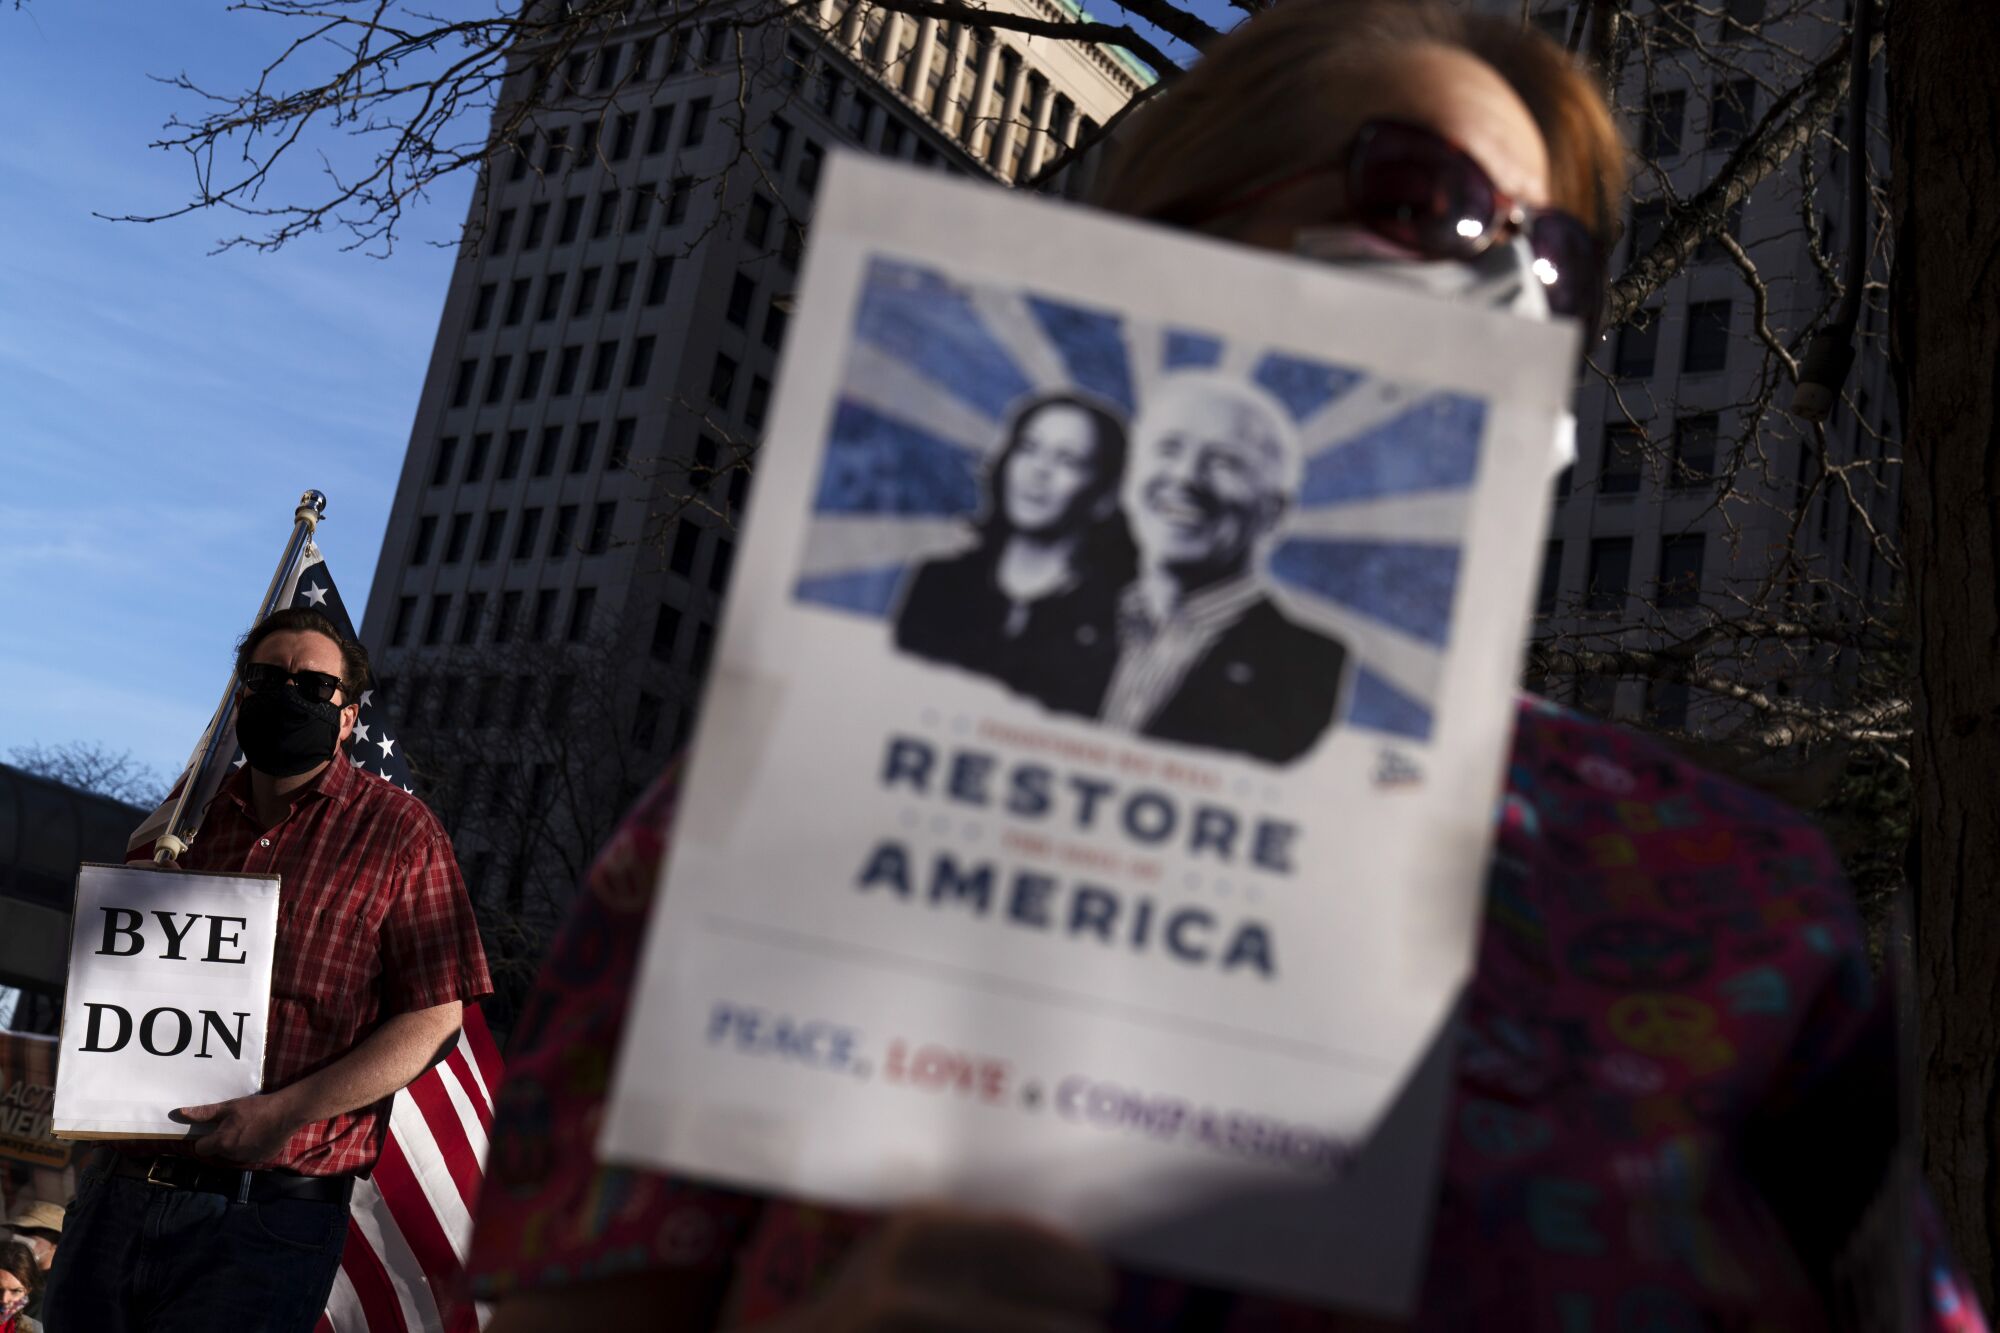 Joe Biden supporters celebrate the election results at a rally in Detroit